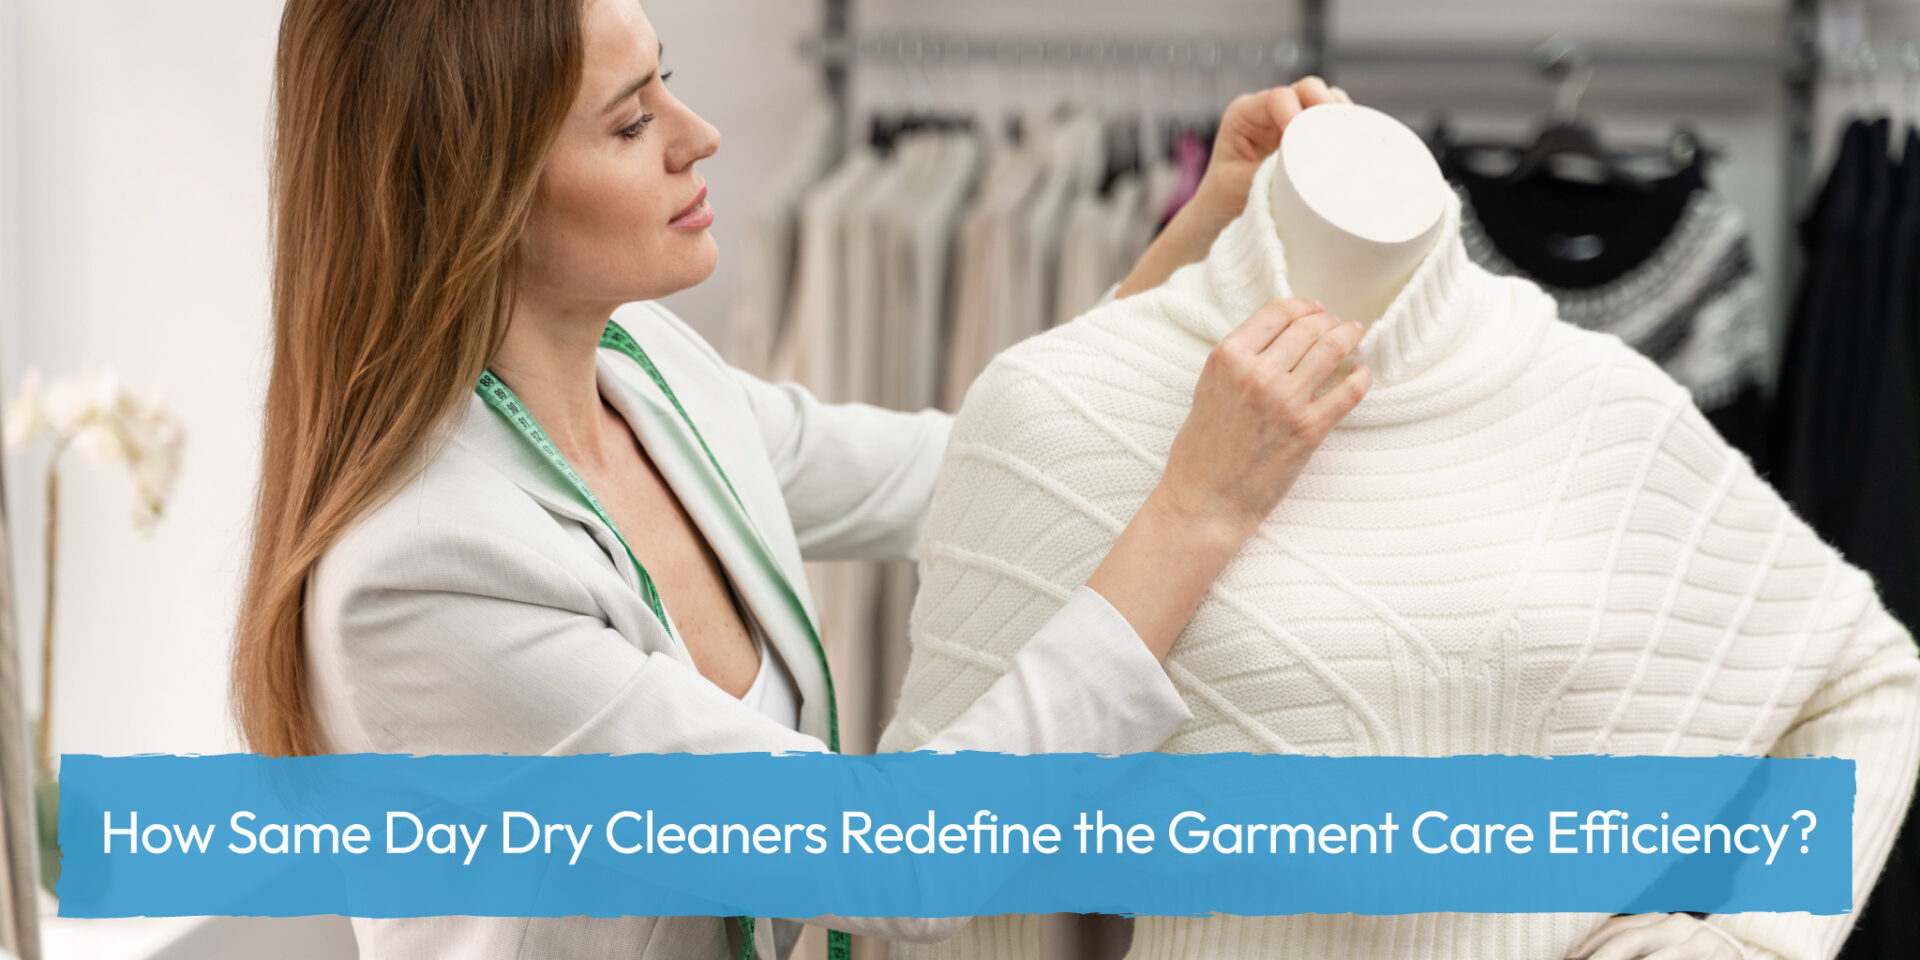 How Same Day Dry Cleaners Redefine the Garment Care Efficiency